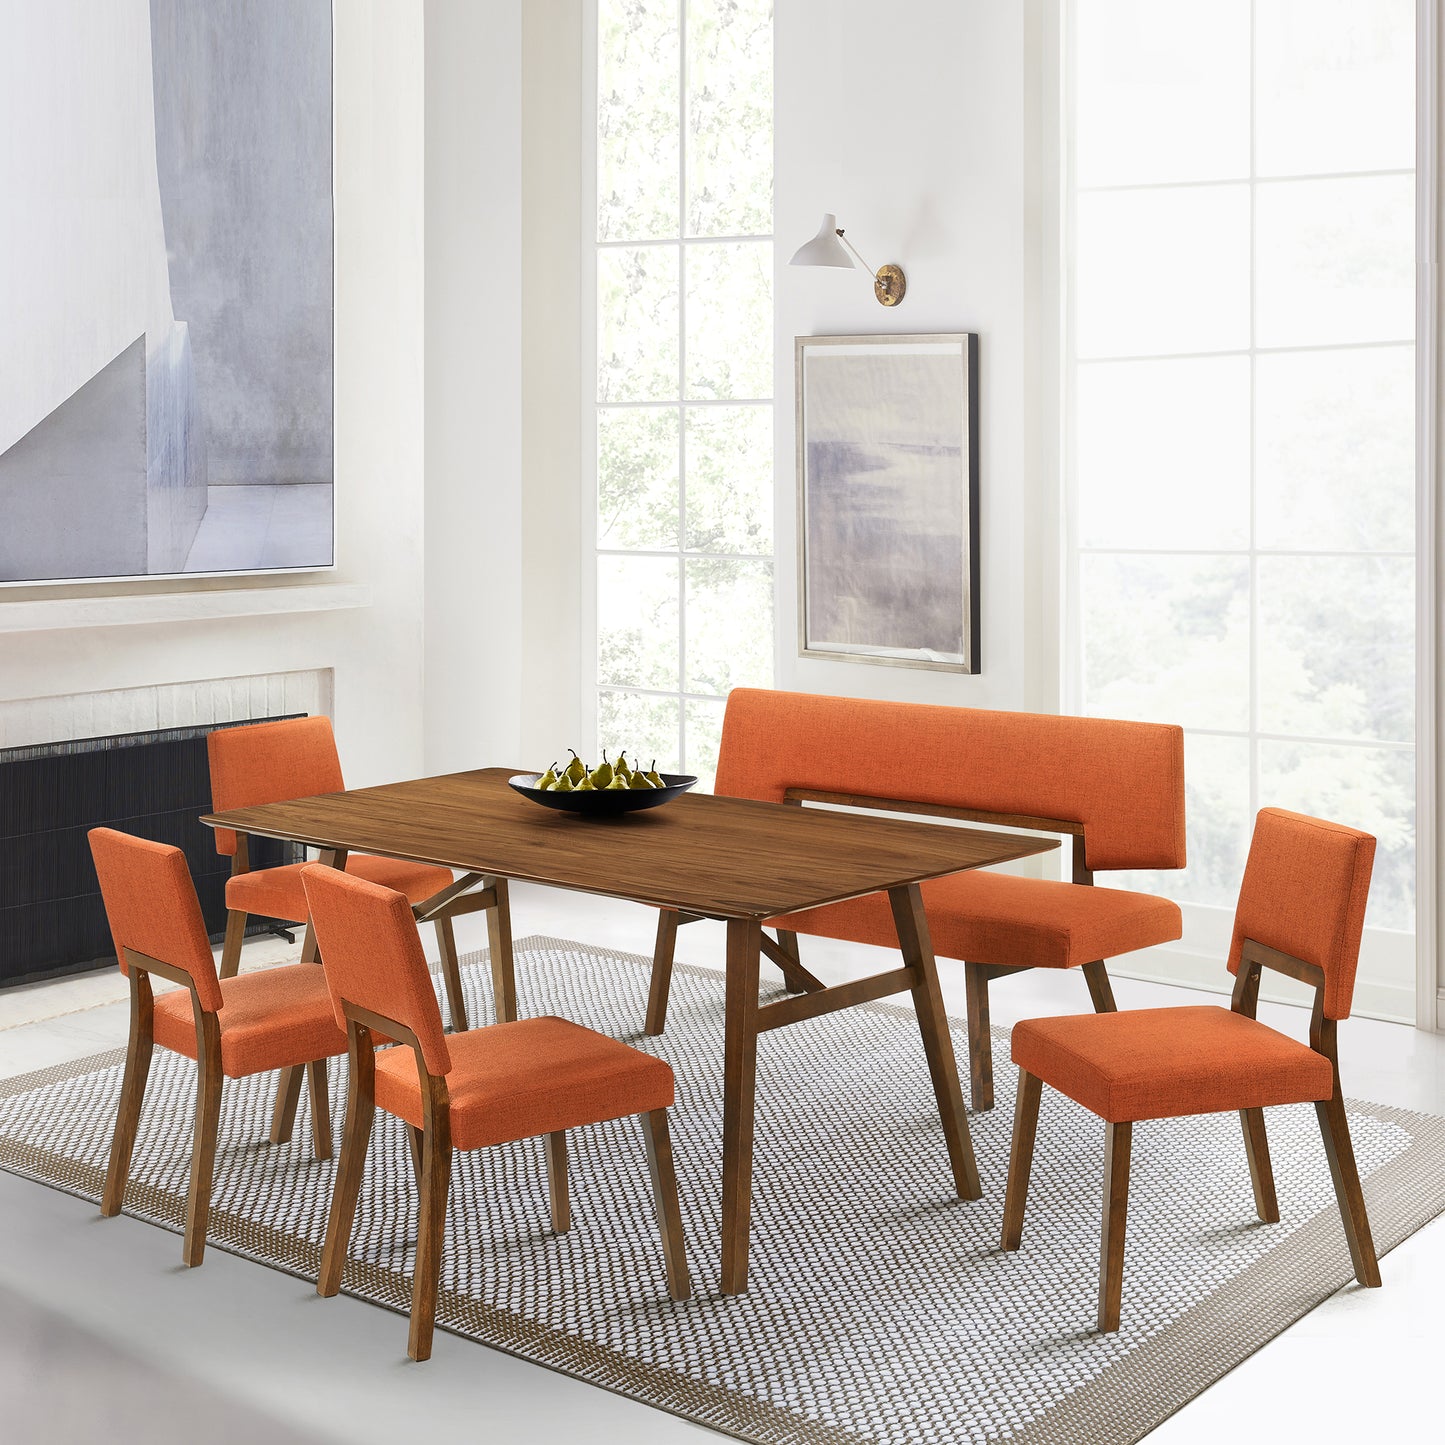 Channell 6 Piece Walnut Wood Dining Table Set with Bench in Orange Fabric